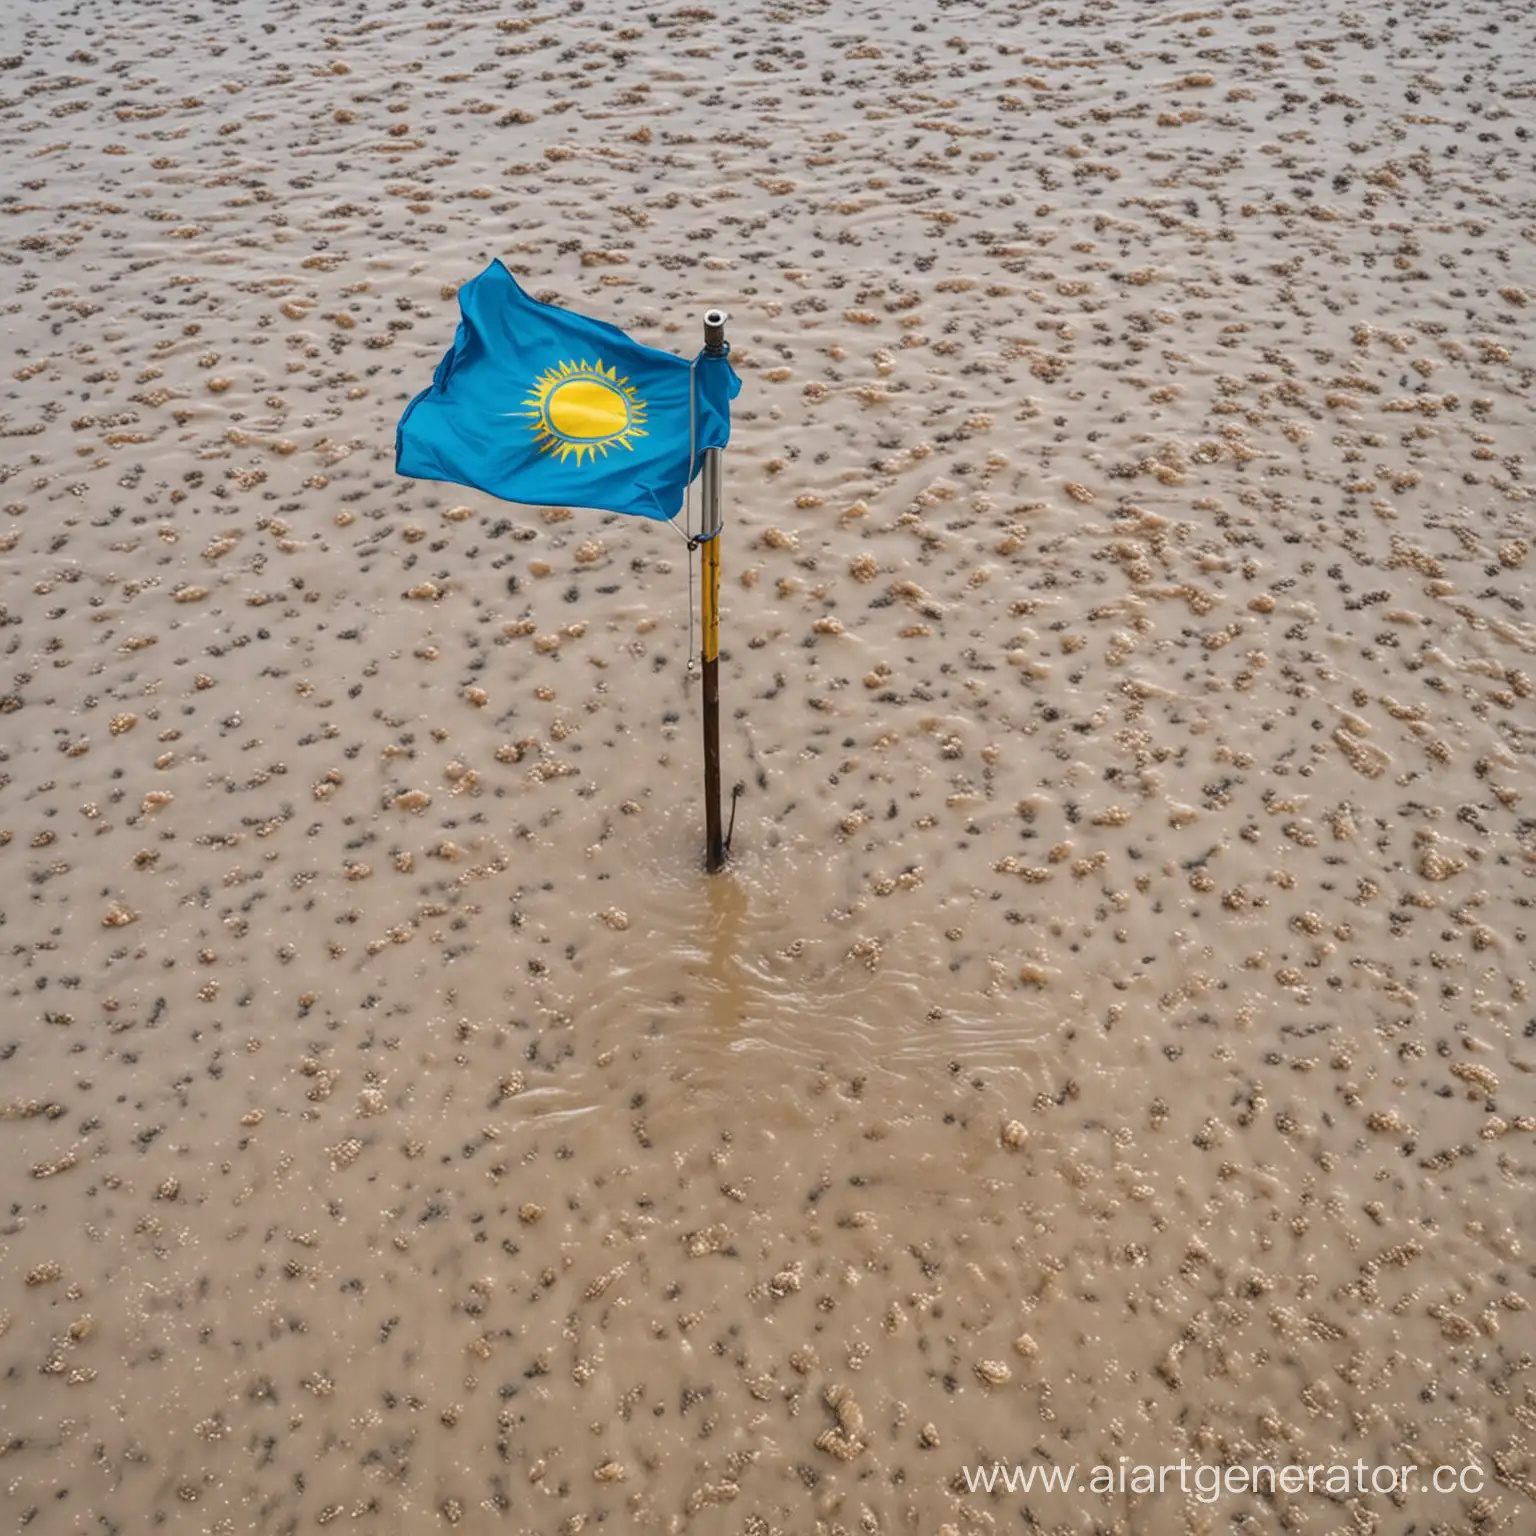 Kazakhstan-Flag-amidst-Flooding-Waters-Symbolic-Resilience-in-a-Natural-Crisis